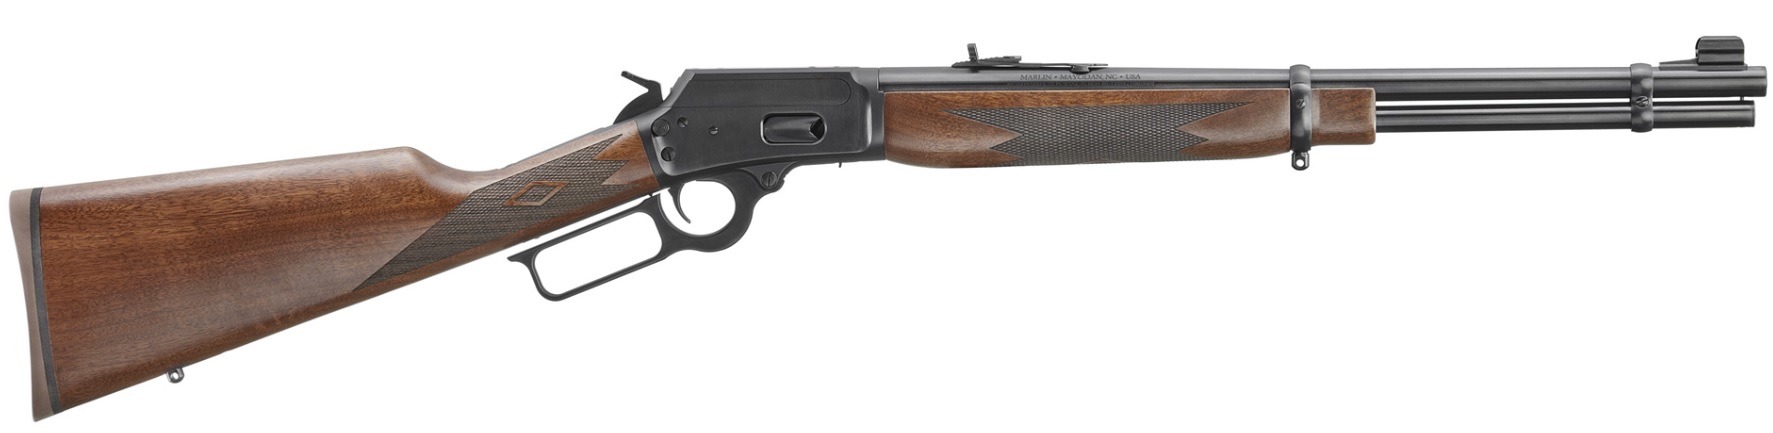 Review of the Ruger-Built Marlin 1894 .357 Magnun